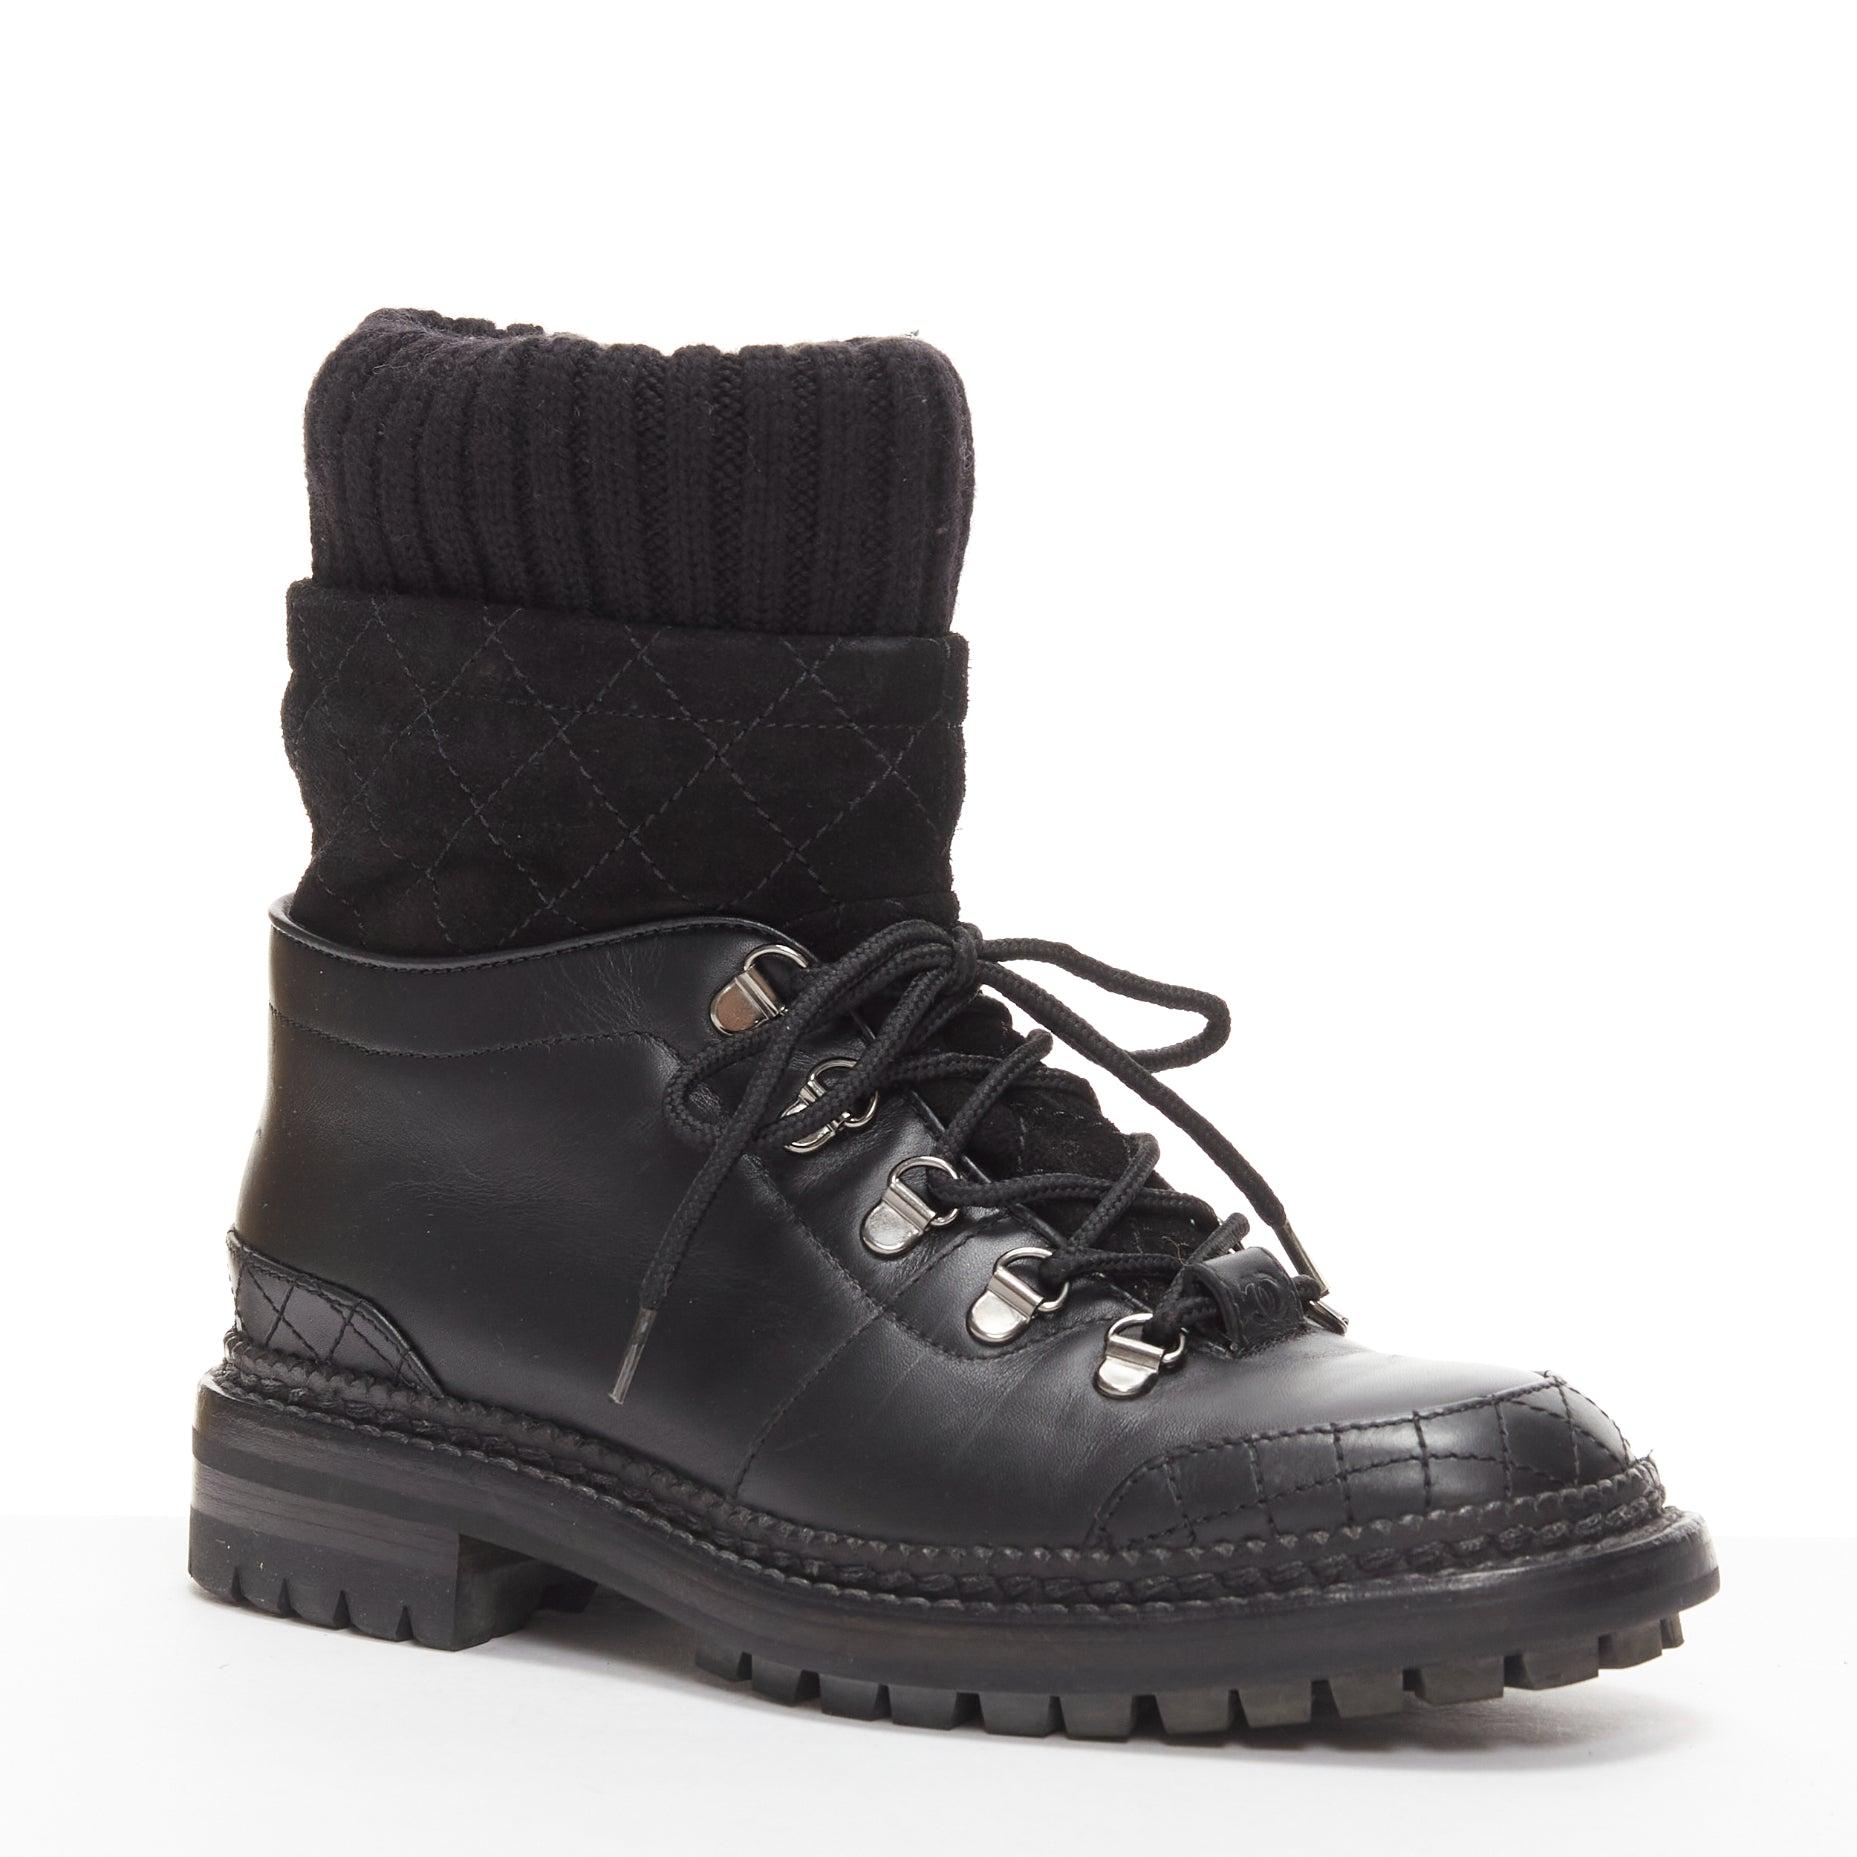 CHANEL black quilted trim CC logo tromp loeil sock ankle boots EU38
Reference: TGAS/D01100
Brand: Chanel
Designer: Karl Lagerfeld
Material: Leather, Fabric
Color: Black, Silver
Pattern: Solid
Closure: Lace Up
Lining: Black Leather
Extra Details: CC